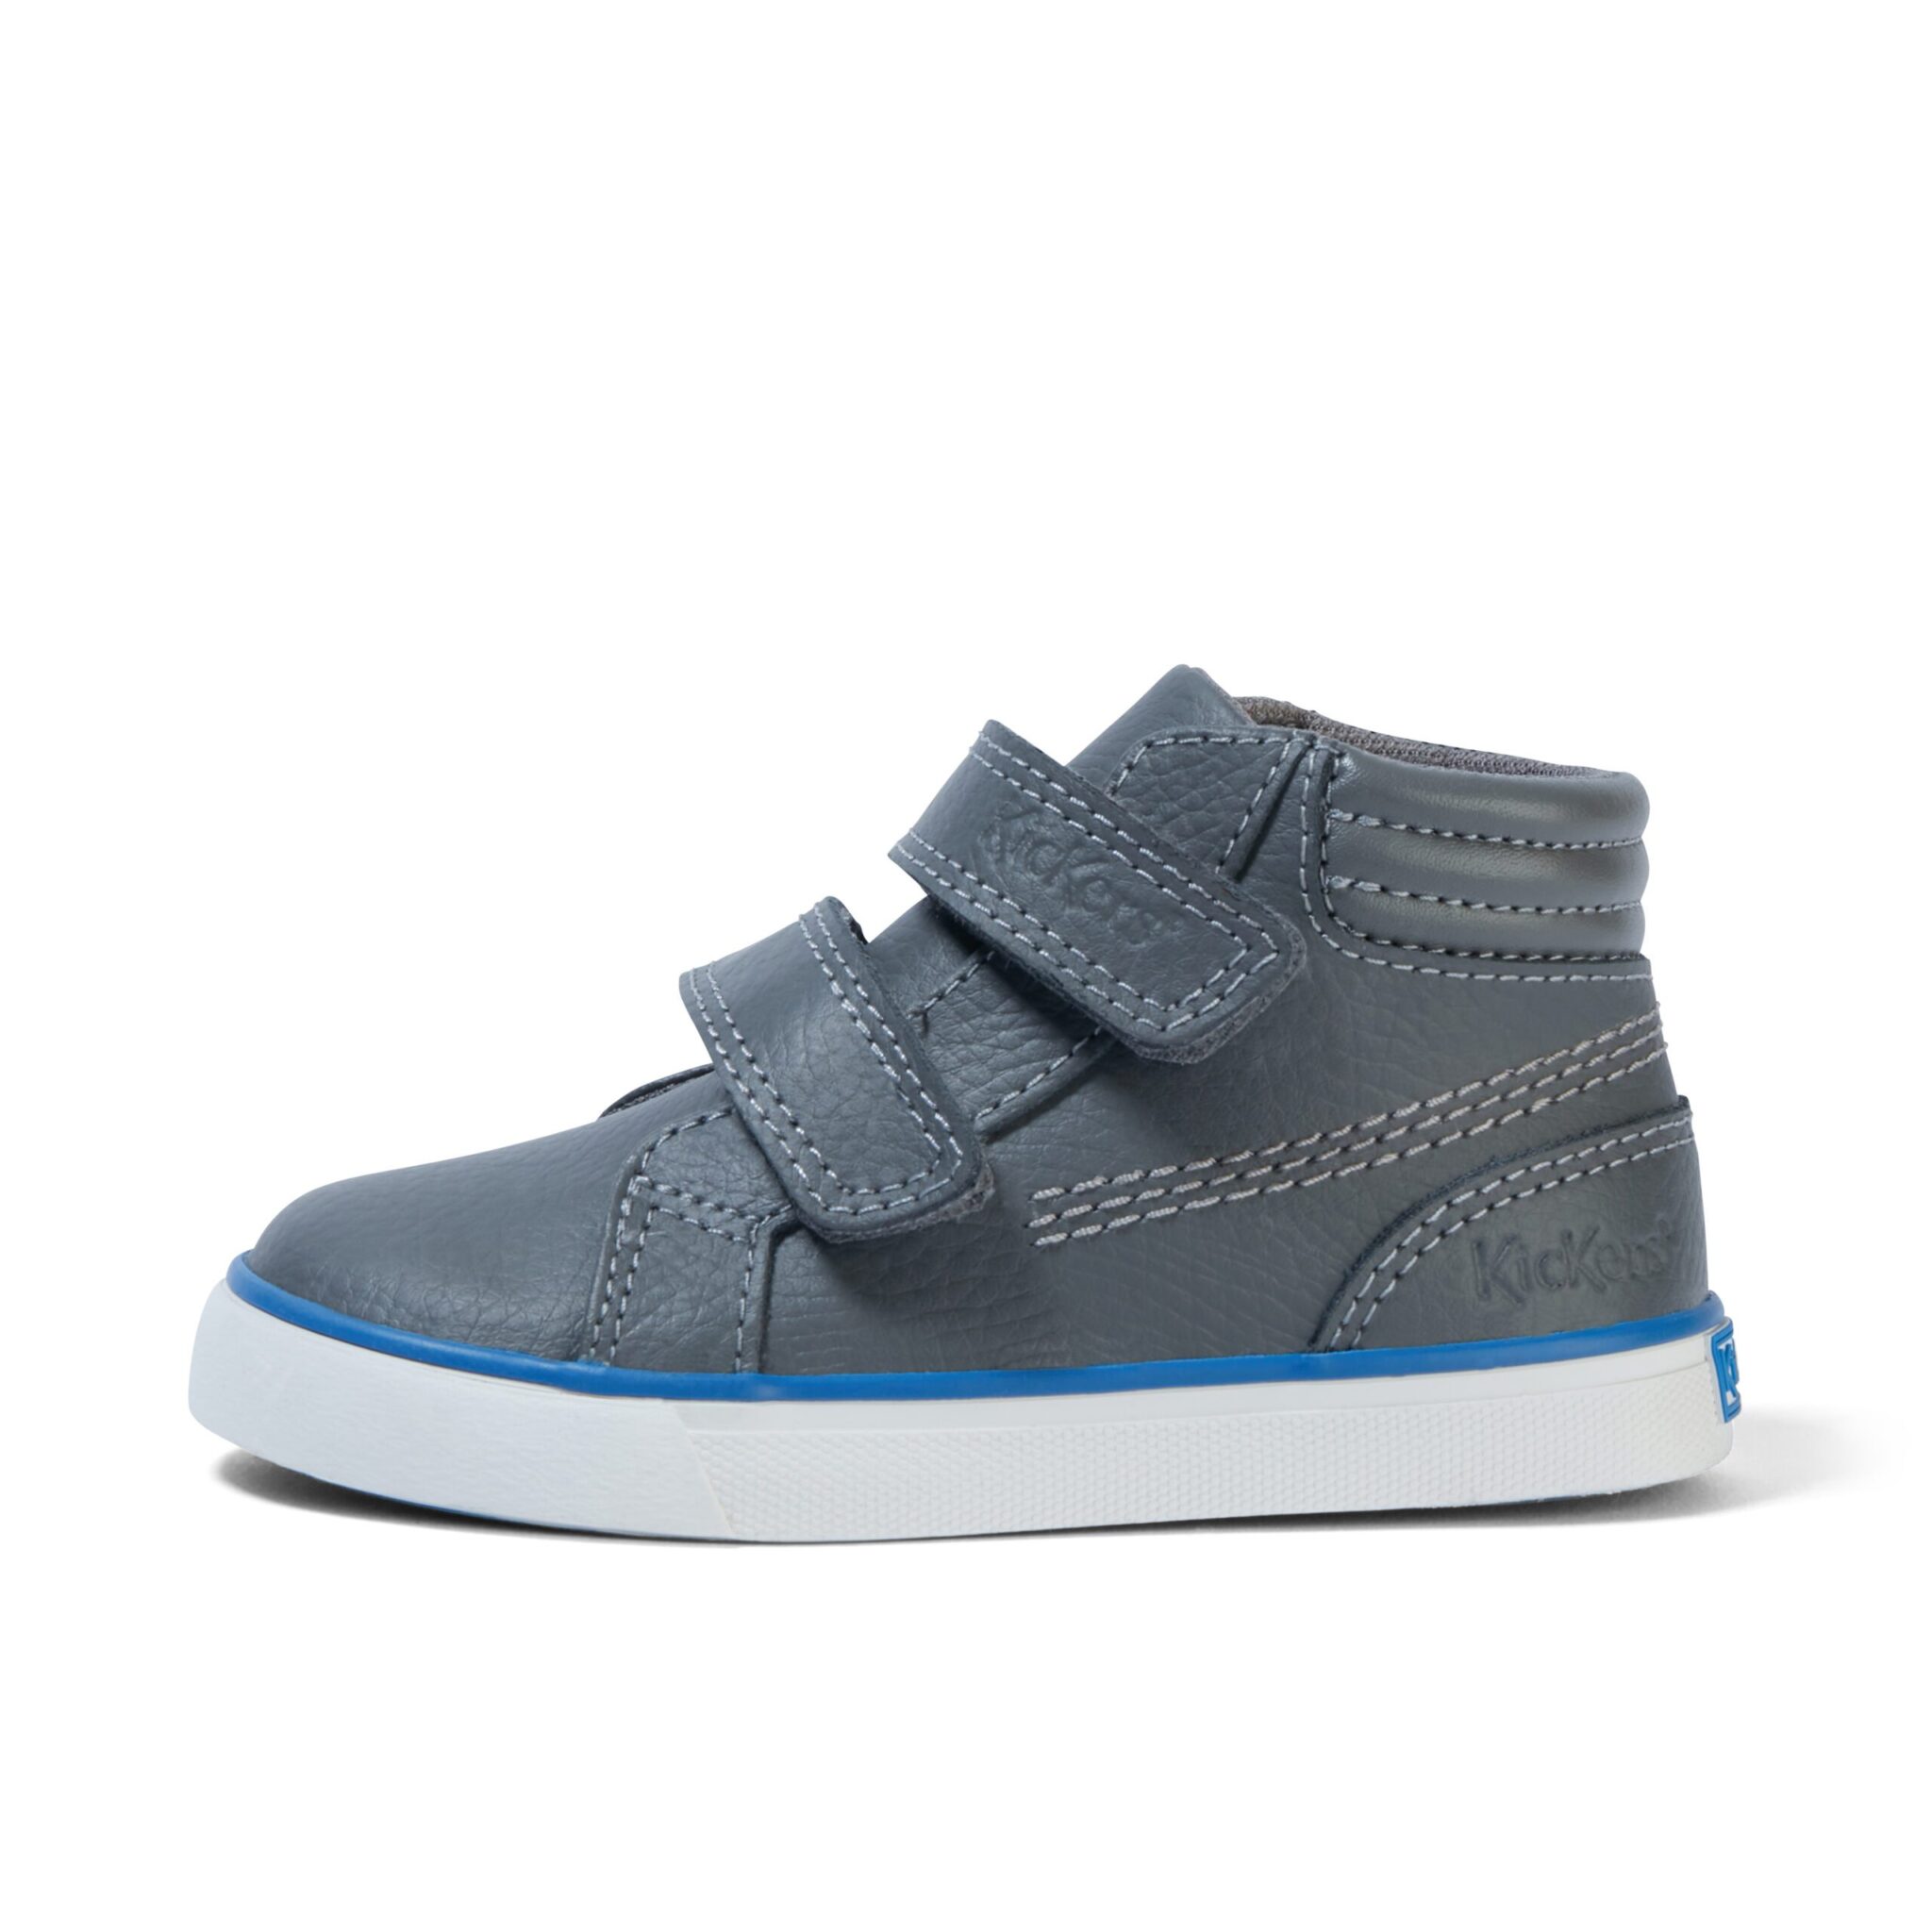 kickers tovni navy boys hi top leather shoes side view